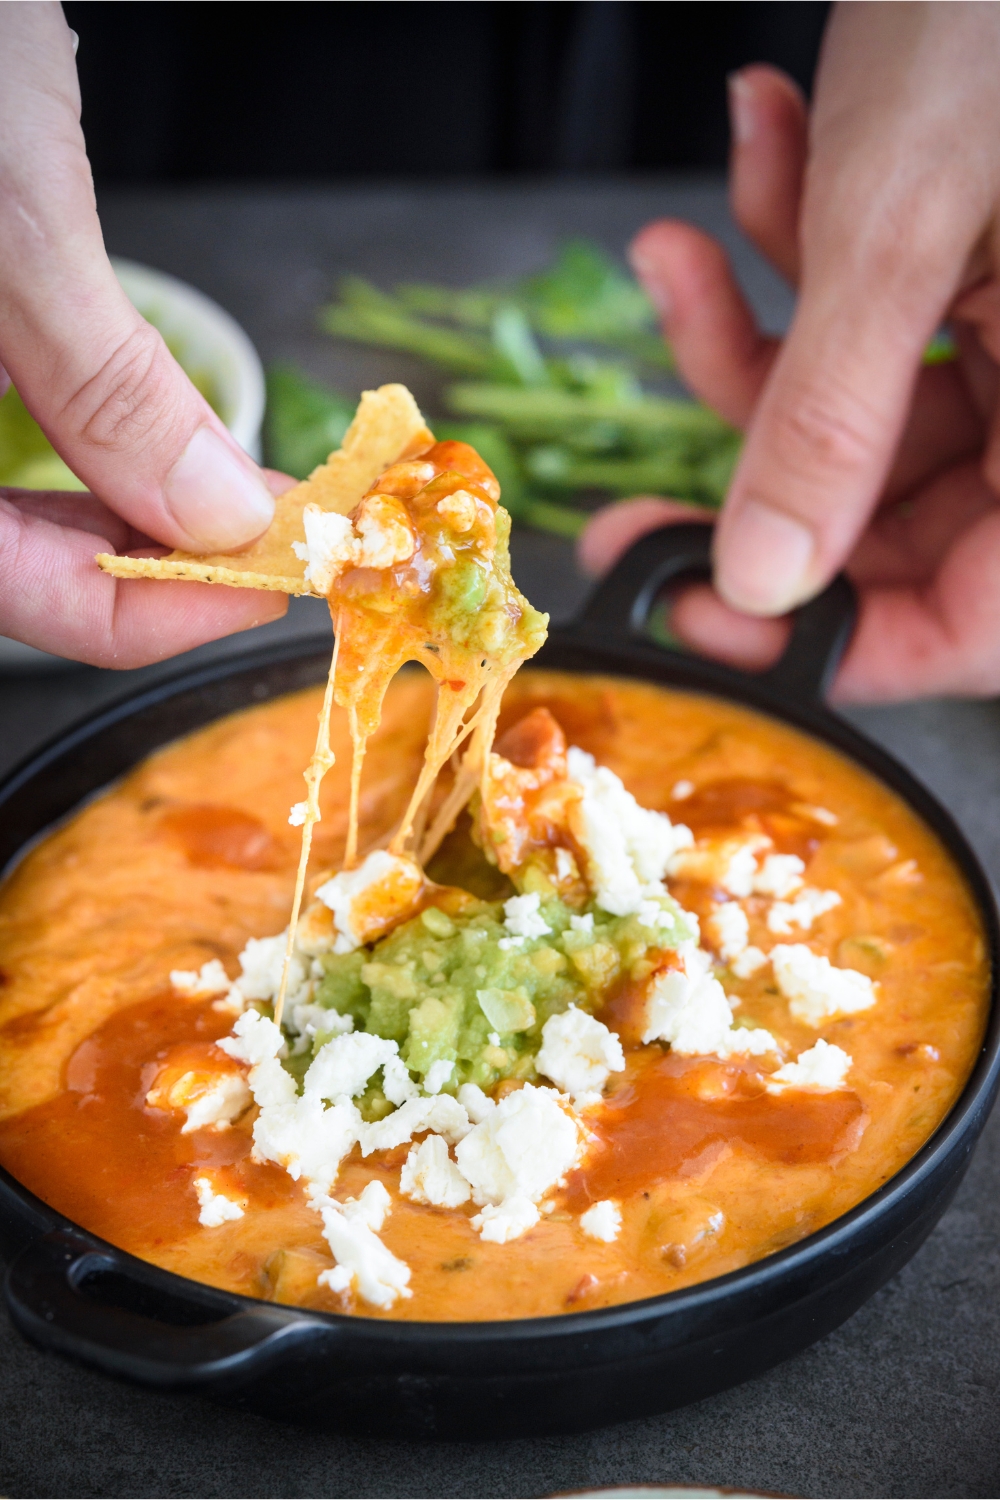 A tortilla chip with a heaping scoop of queso being held over the serving bowl.